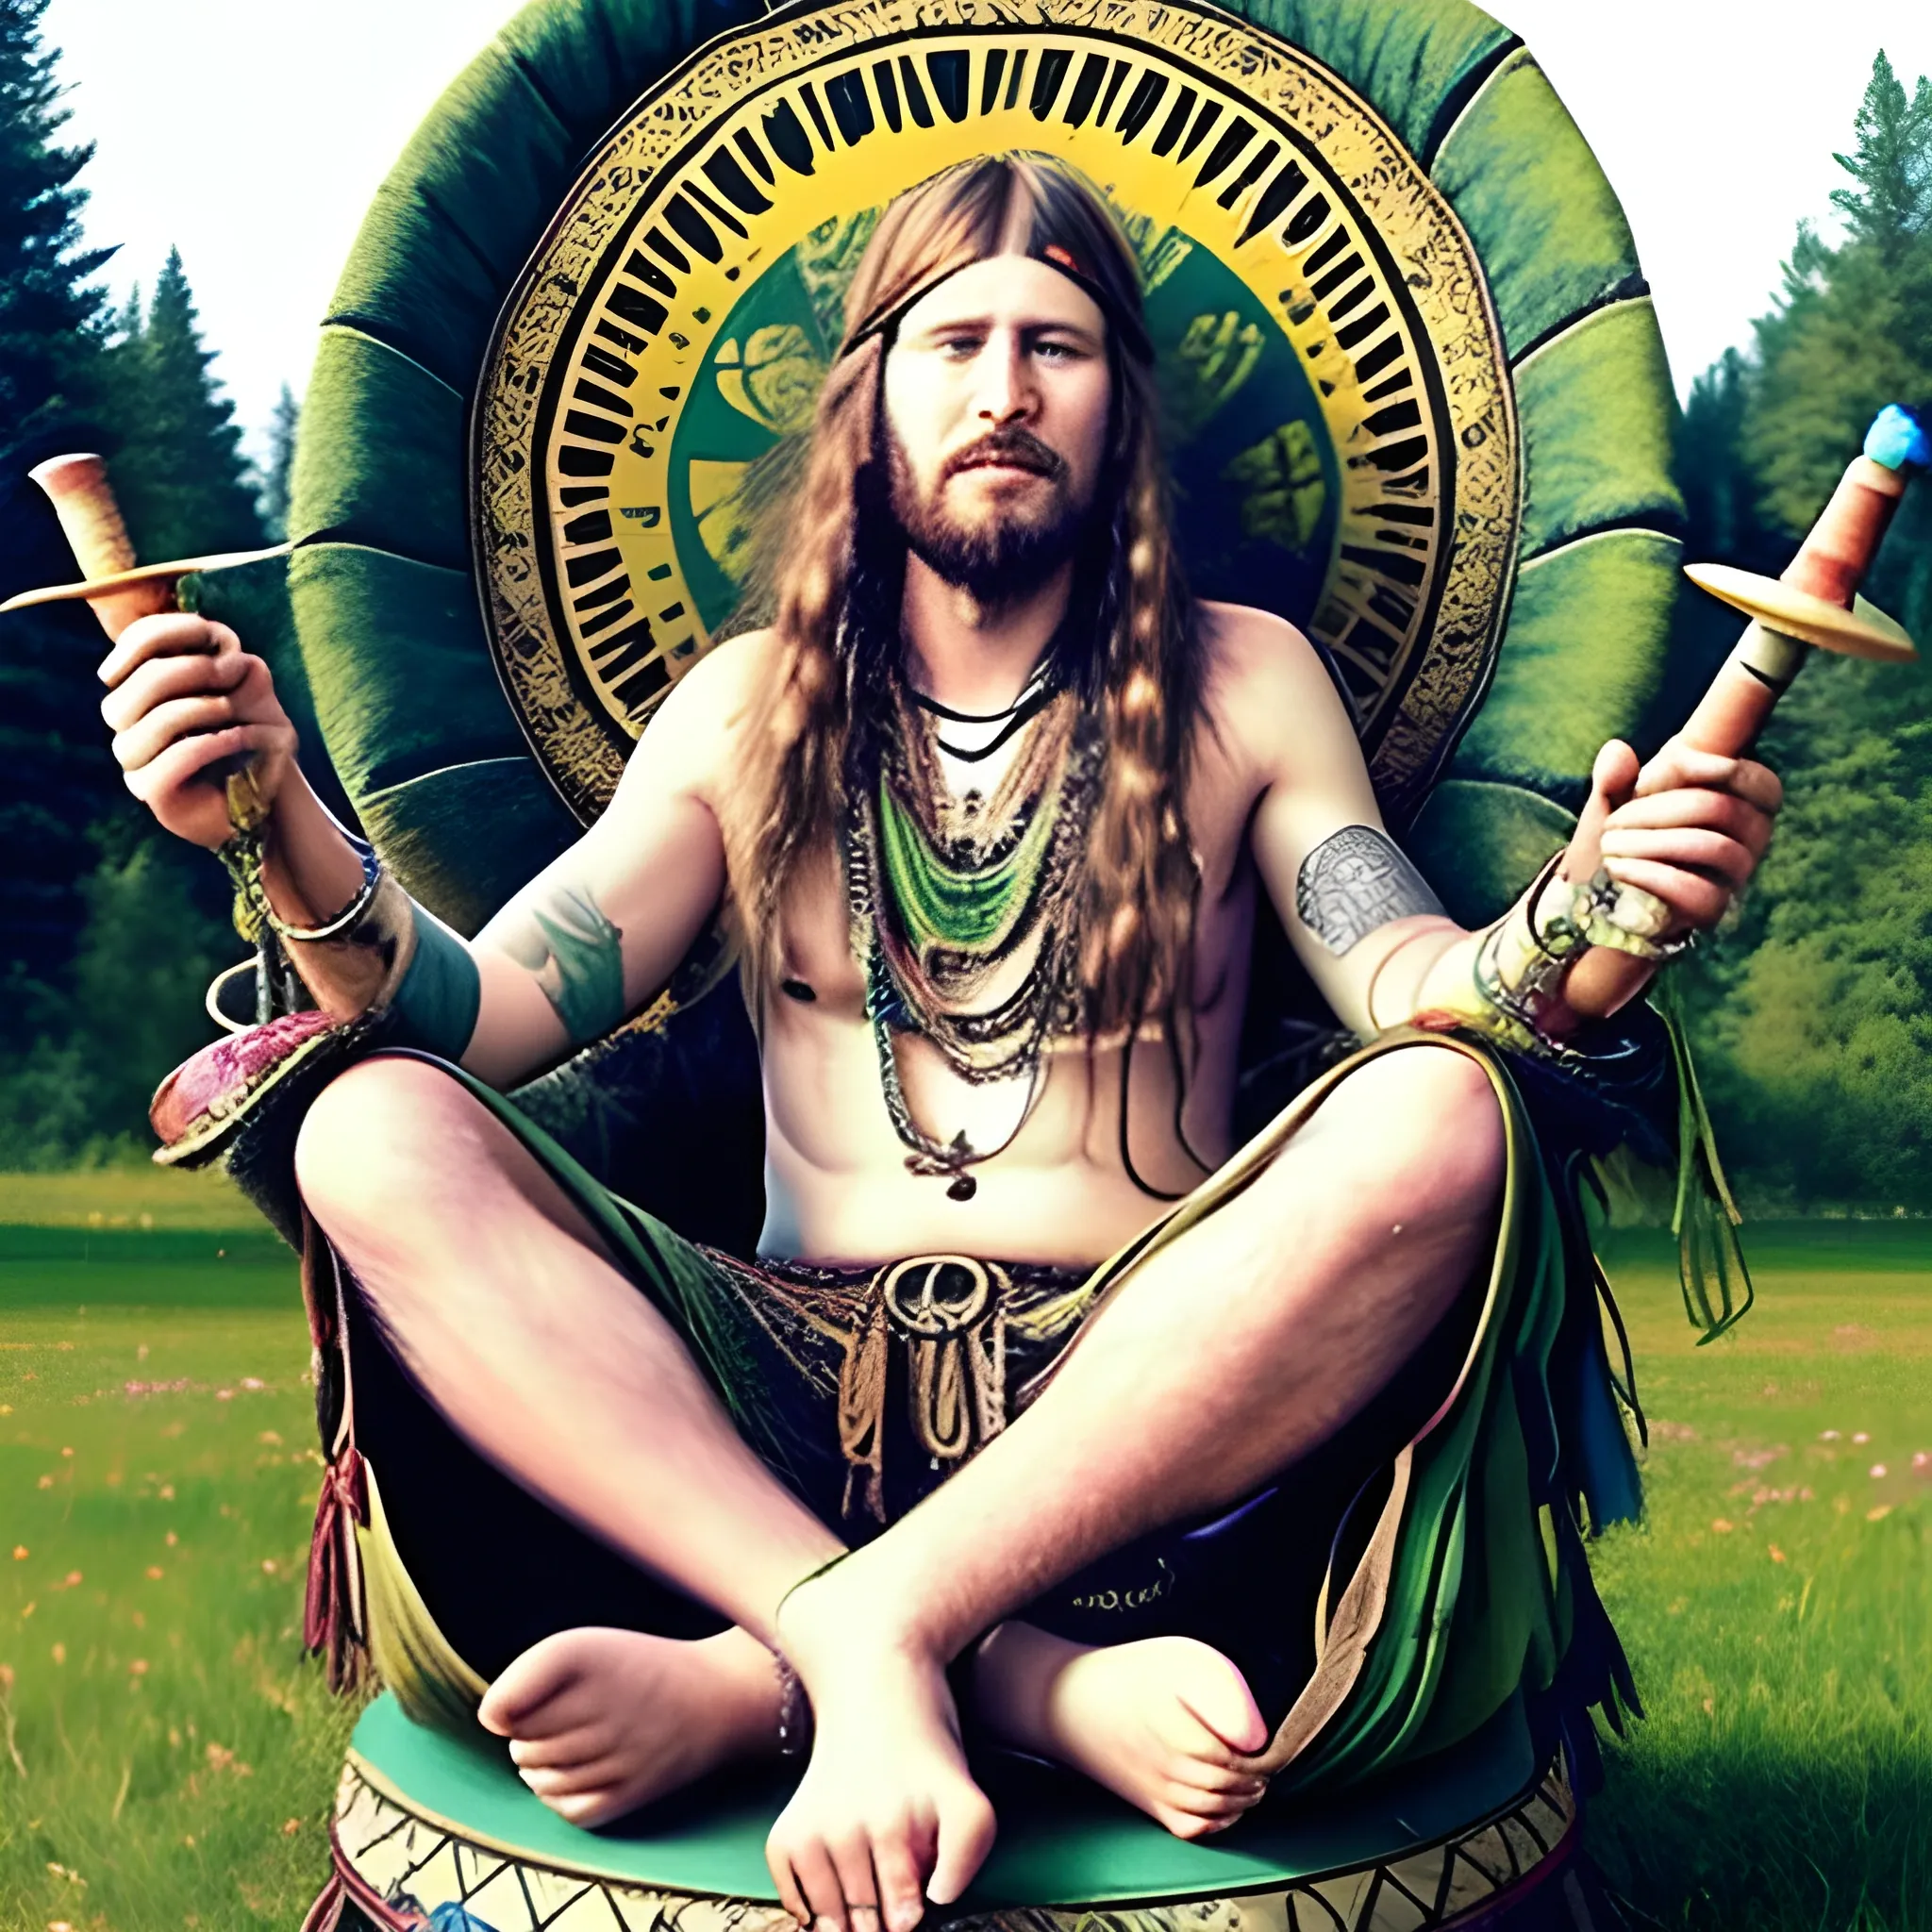 I want to see a Hippie sitting on a throan with a joint in his mouth with a bunch of bongs sitting around his throne. 